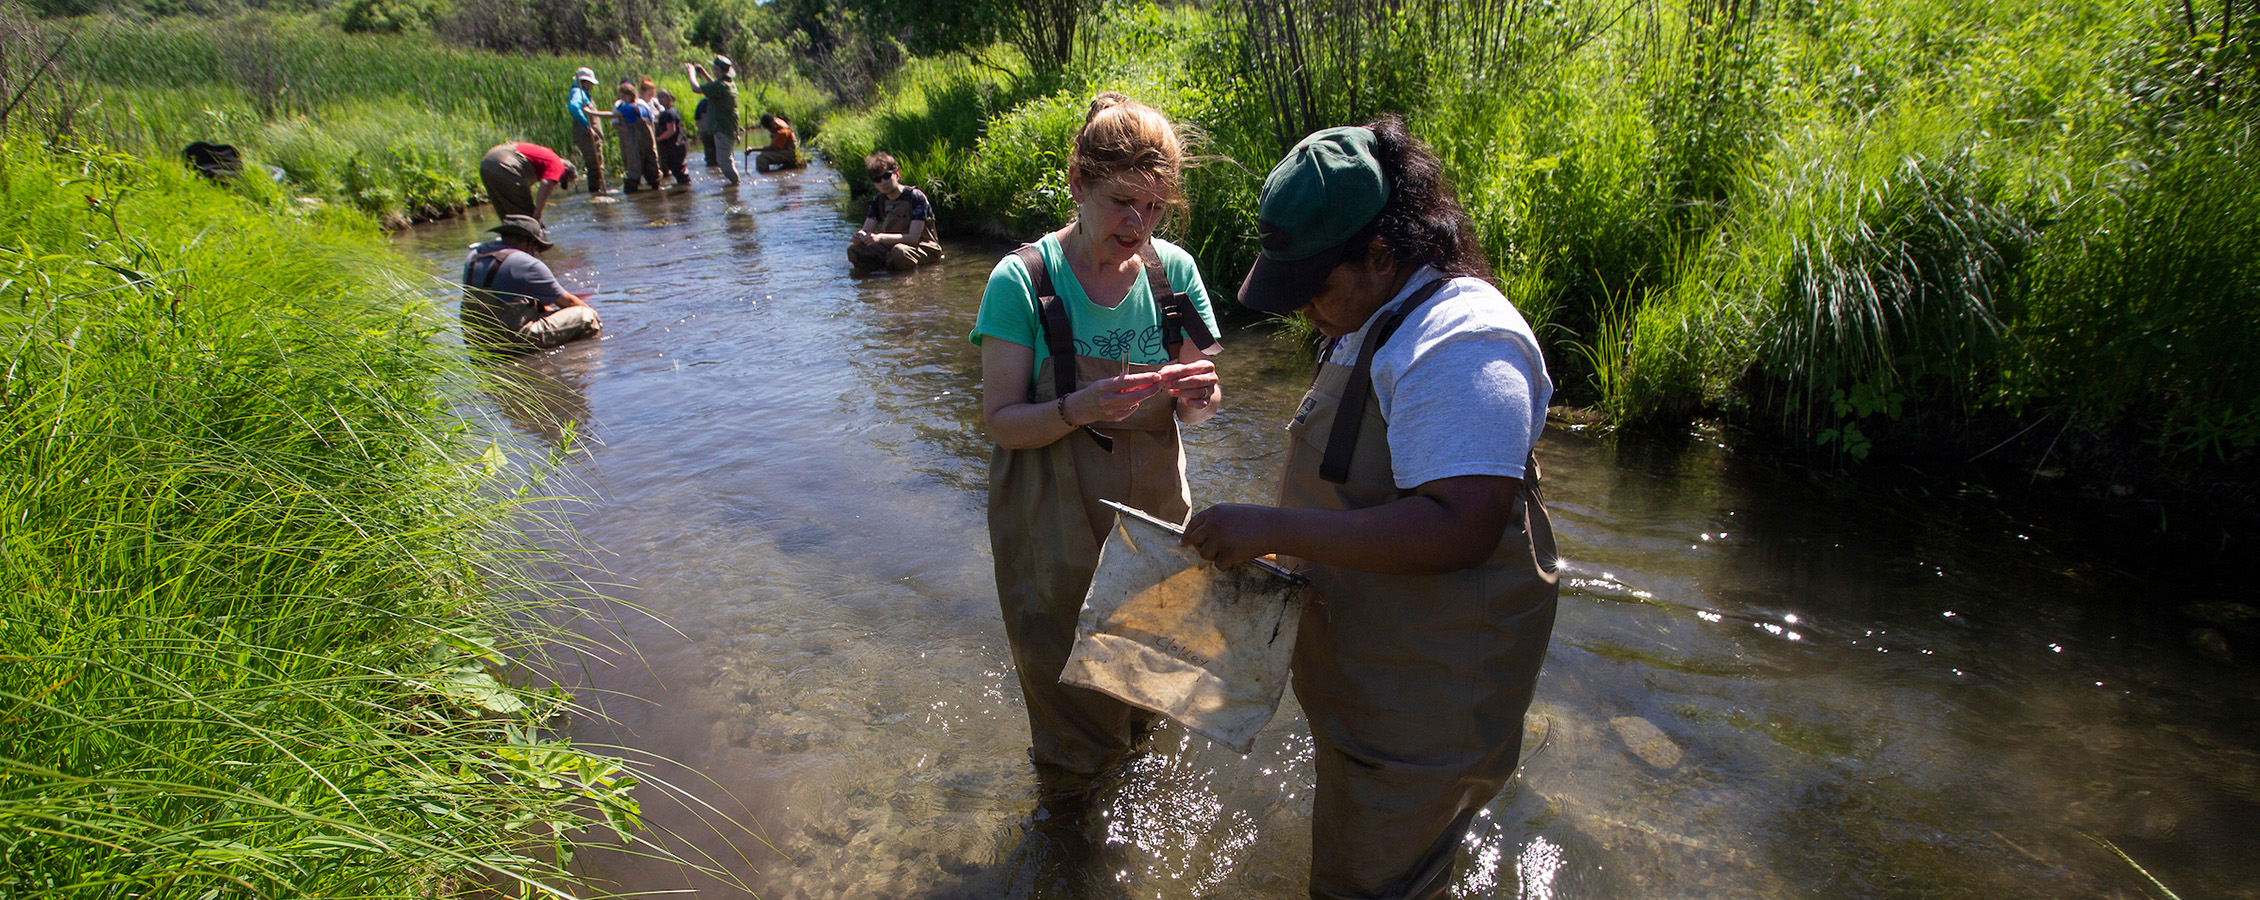 Students wearing waders stand in stream during freshwater camp